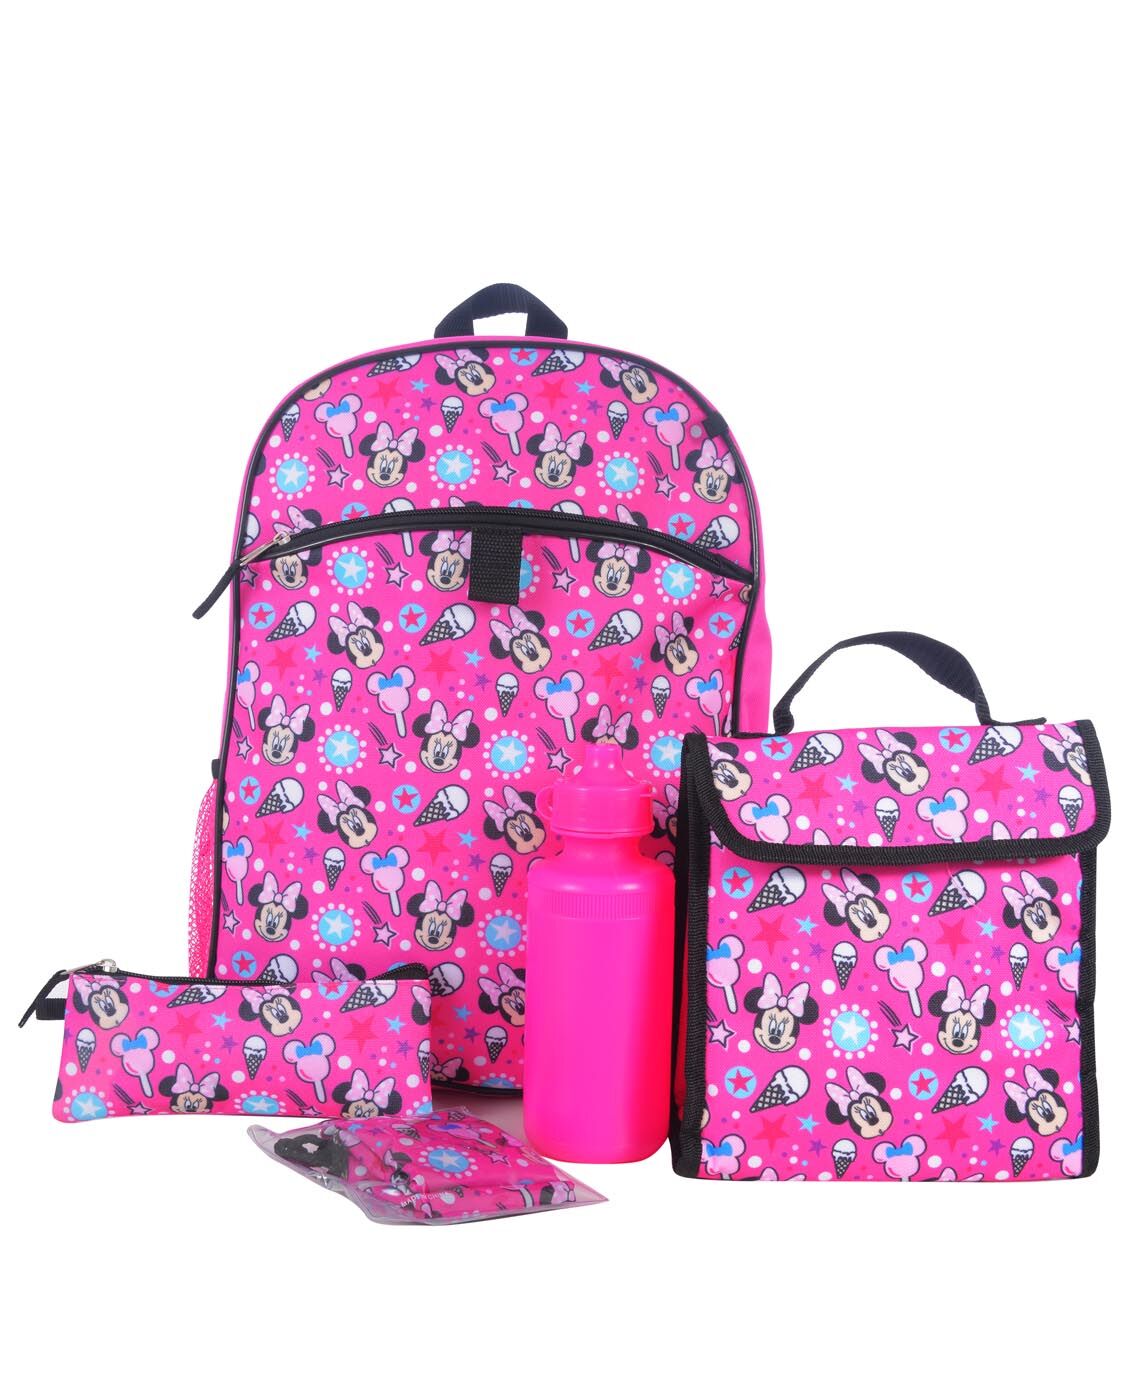 Disney Minnie Mouse 5 Piece Backpack Set - image 1 of 6